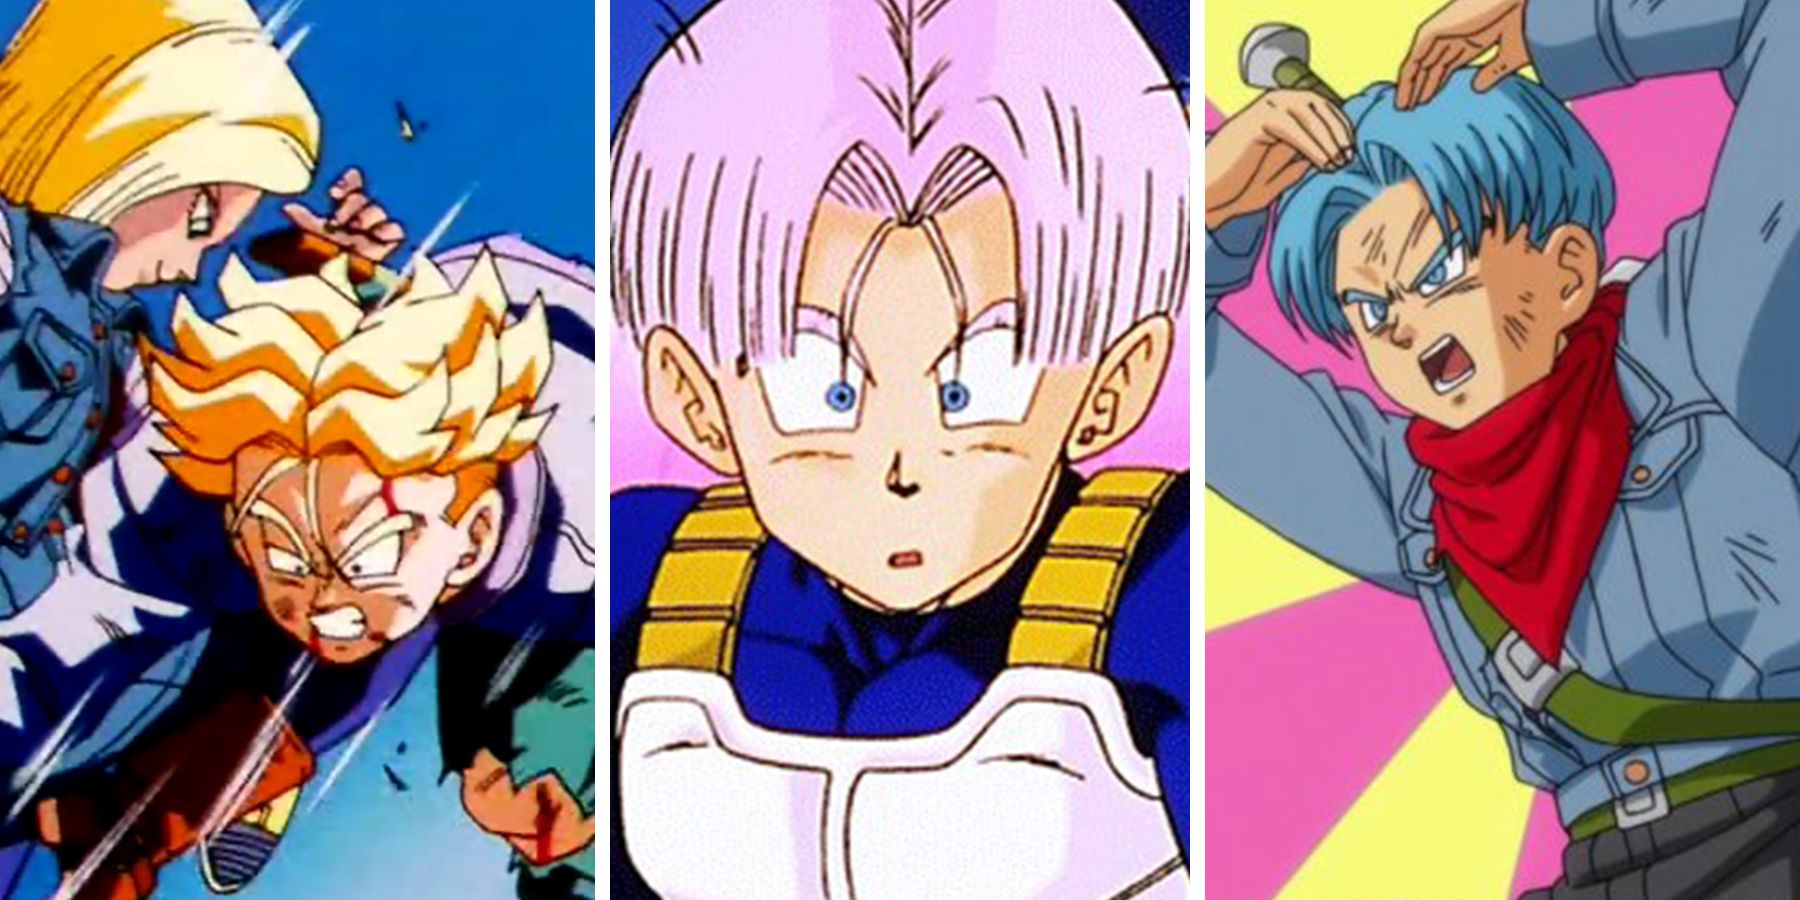 Why Does Future Trunks' Hair Change Colors?